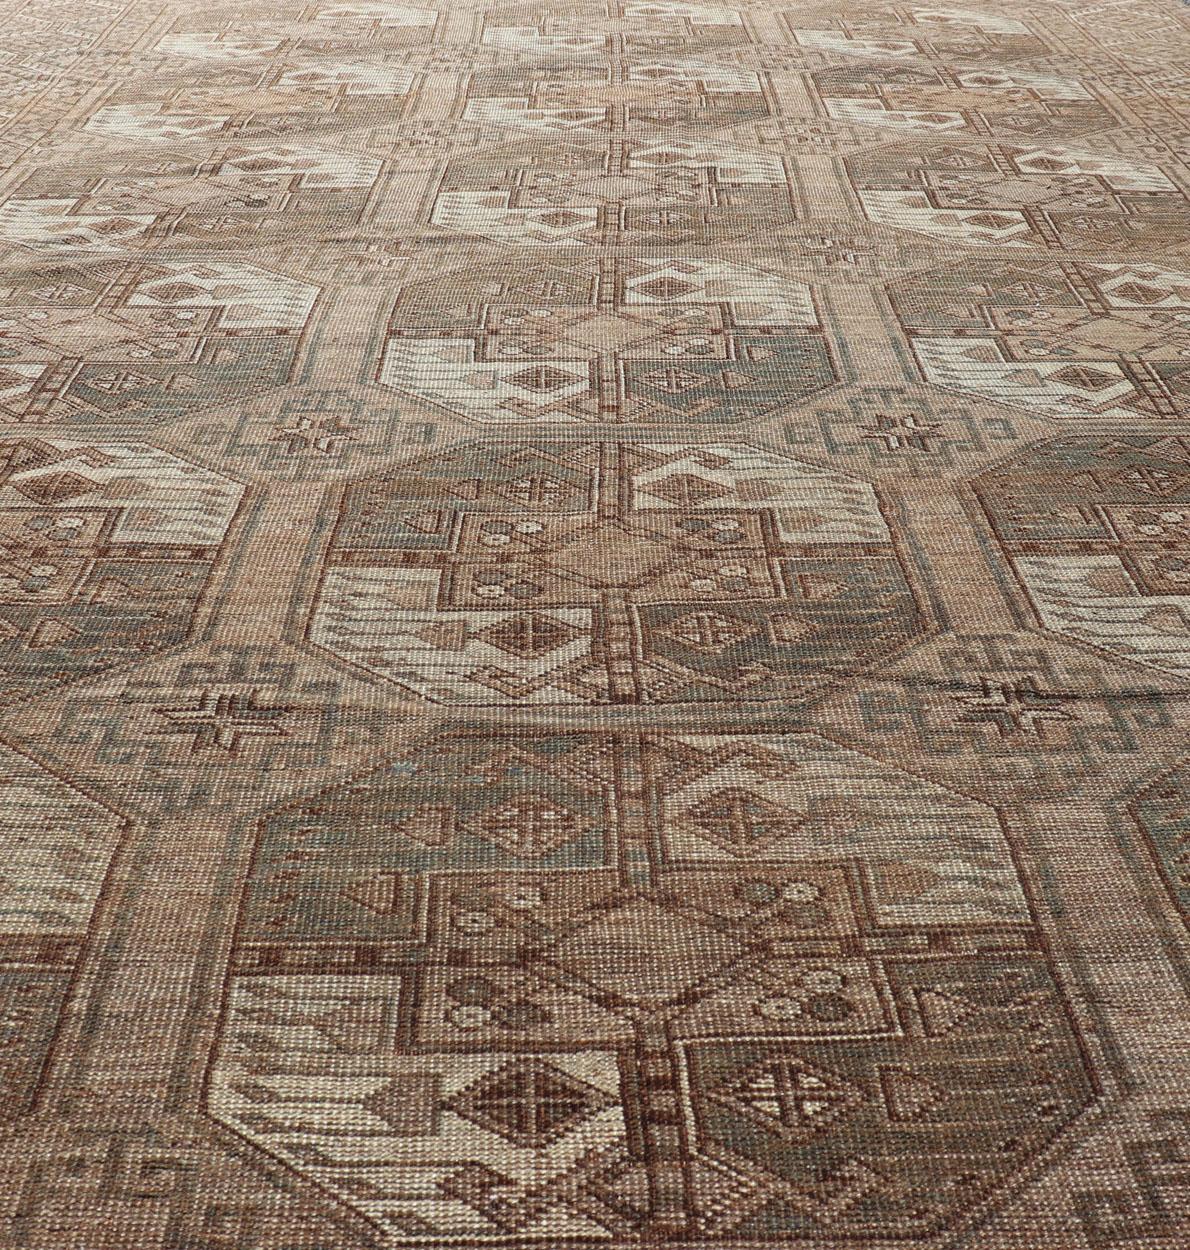 Hand-Knotted Turkomen Ersari Rug in Wool with All-Over Sub-Geometric Gul Design For Sale 2